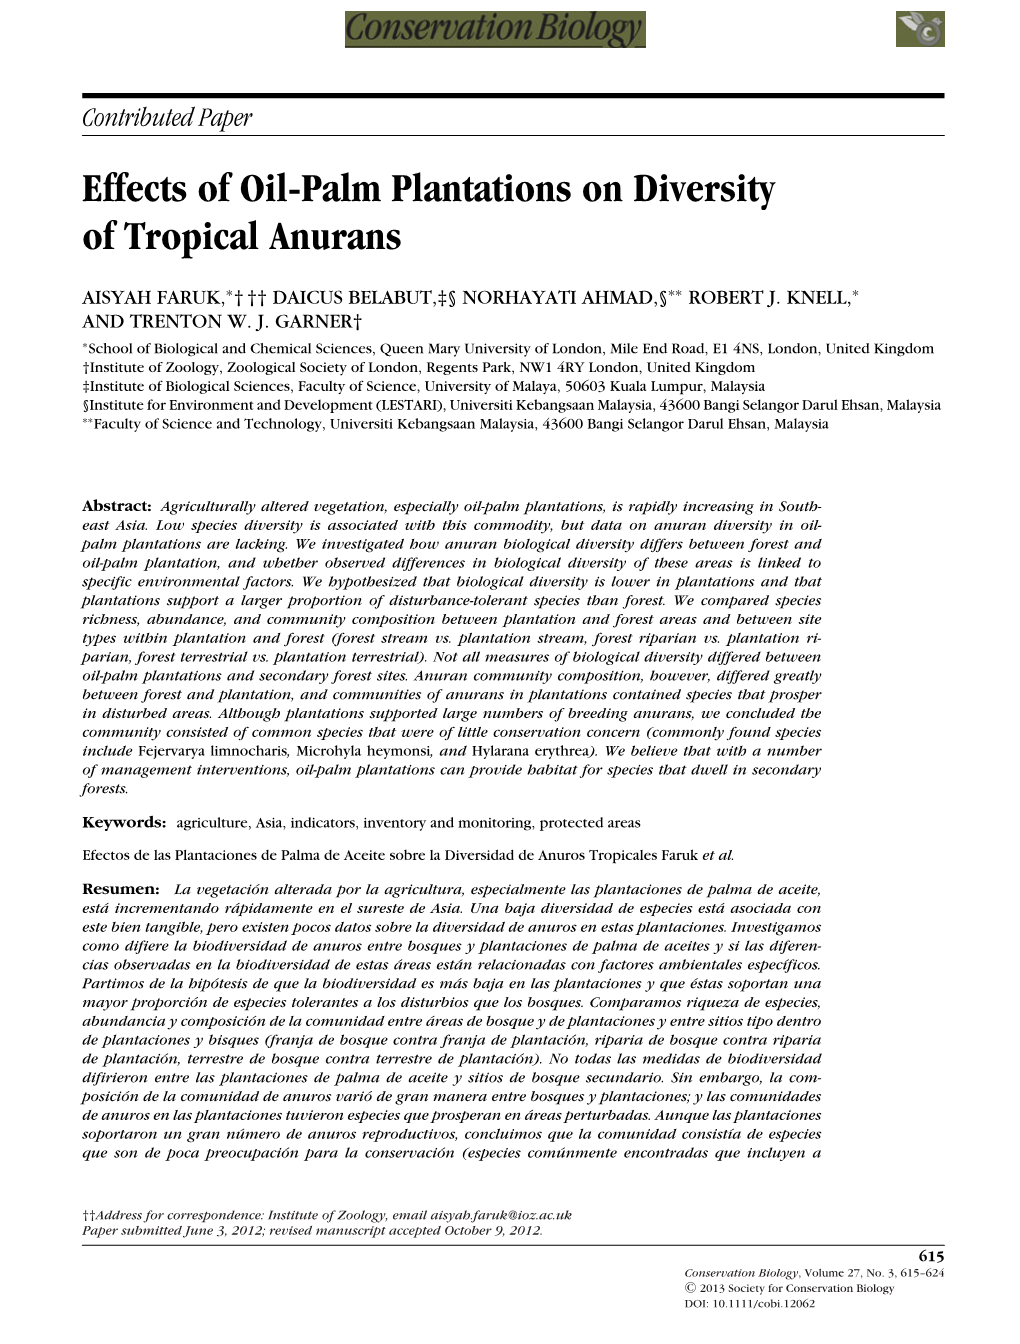 Effects of Oilpalm Plantations on Diversity of Tropical Anurans